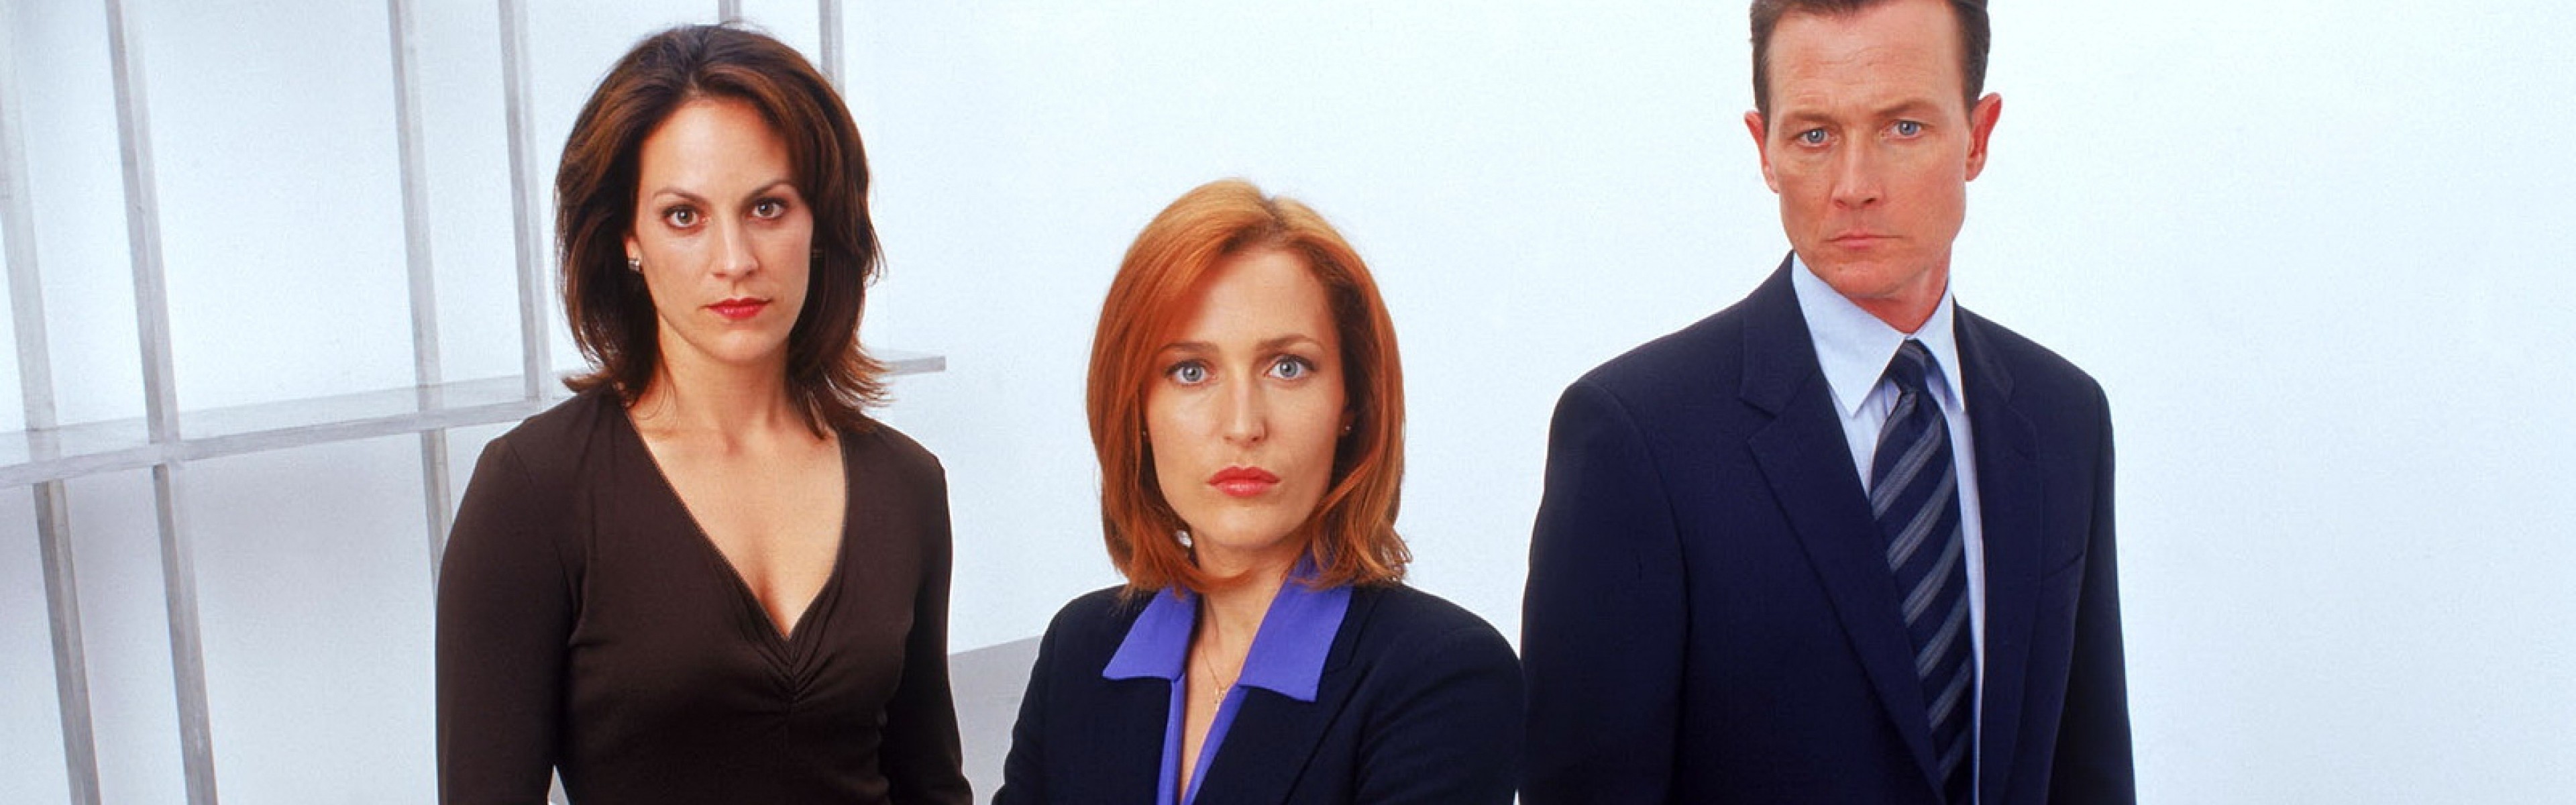 3840x1200 Preview the x files